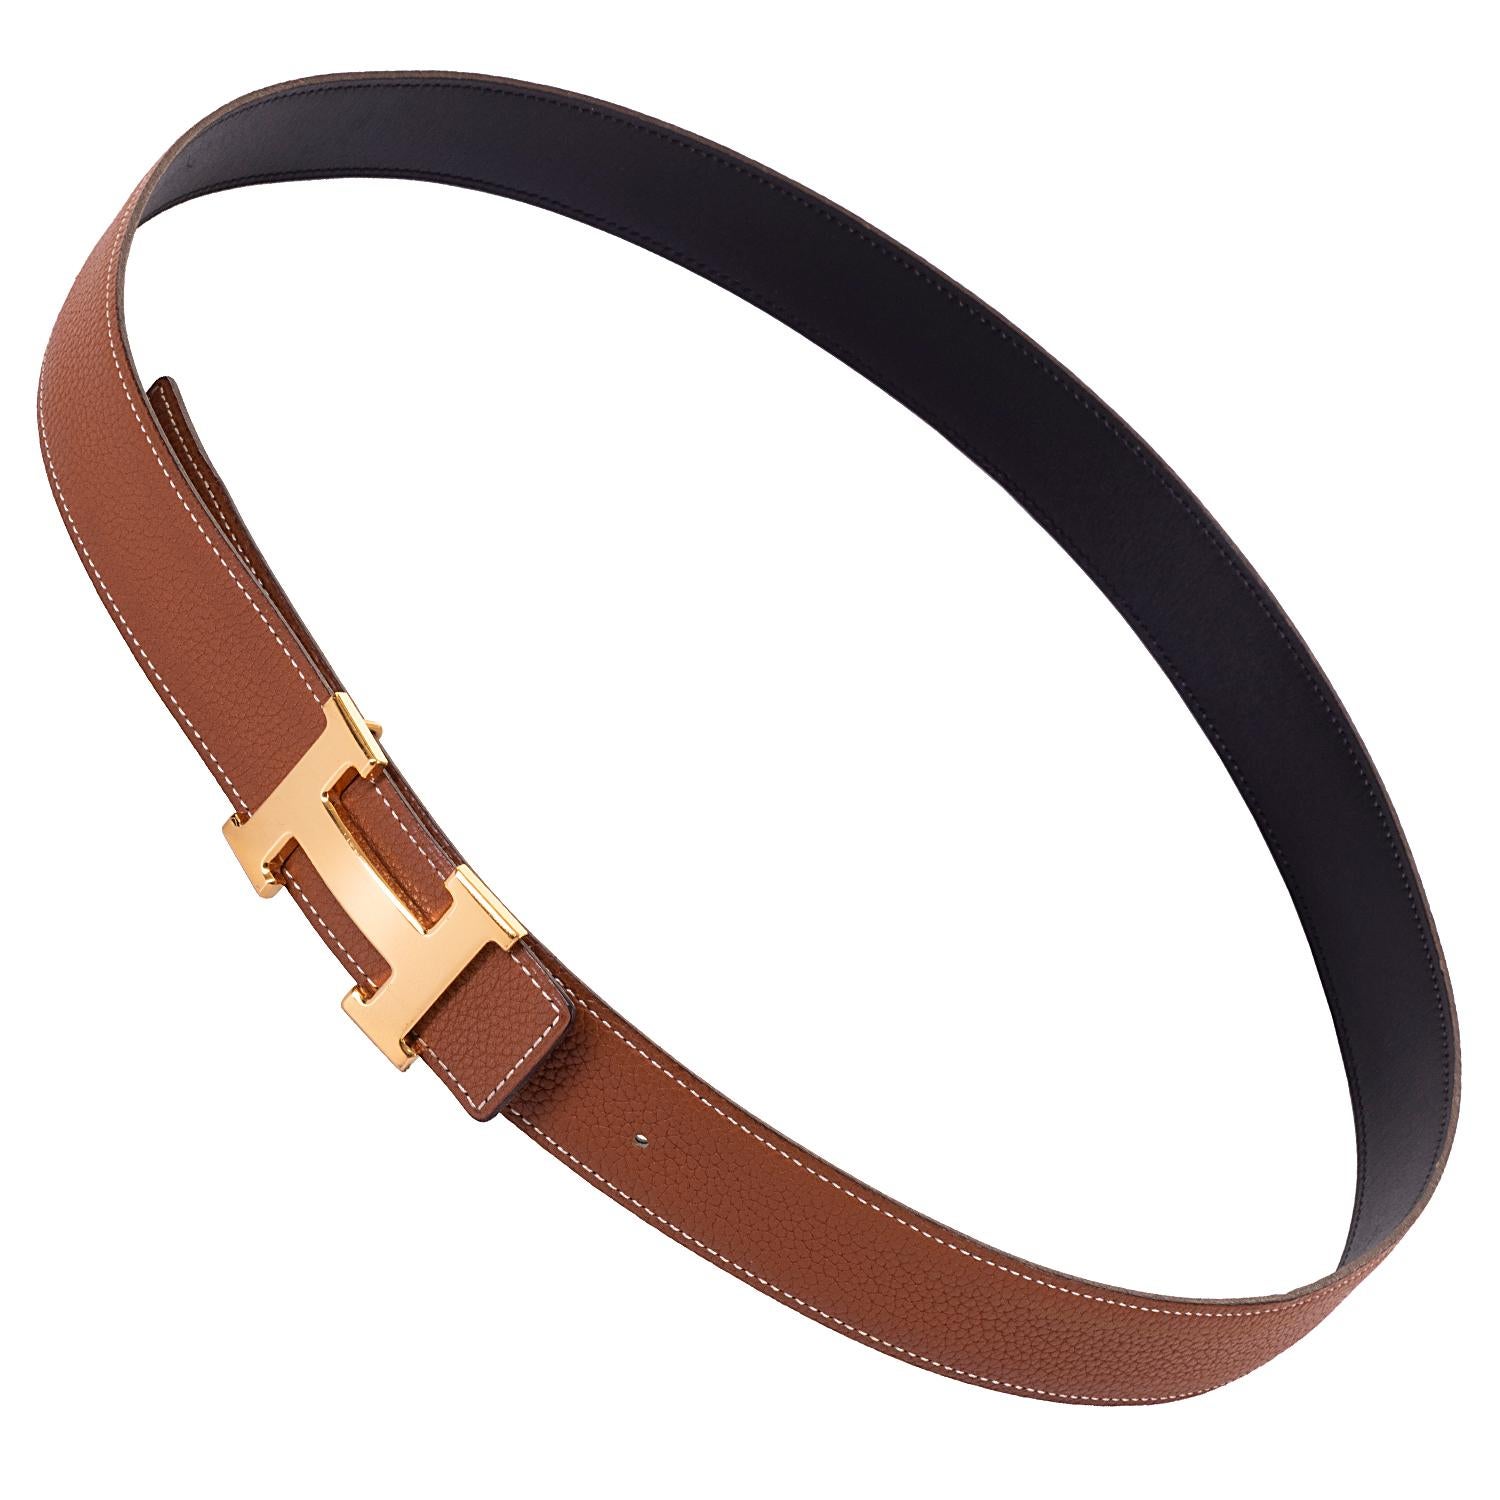 A Superb Hermes Men's Reversible Belt, in excellent condition, accented with the classic Hermes Gold 'H' Buckle. Measuring 100cm (to fit waist sizes 38in. to 40in.) the belt has black Box leather to one side, with grained Sabel Togo leather to the